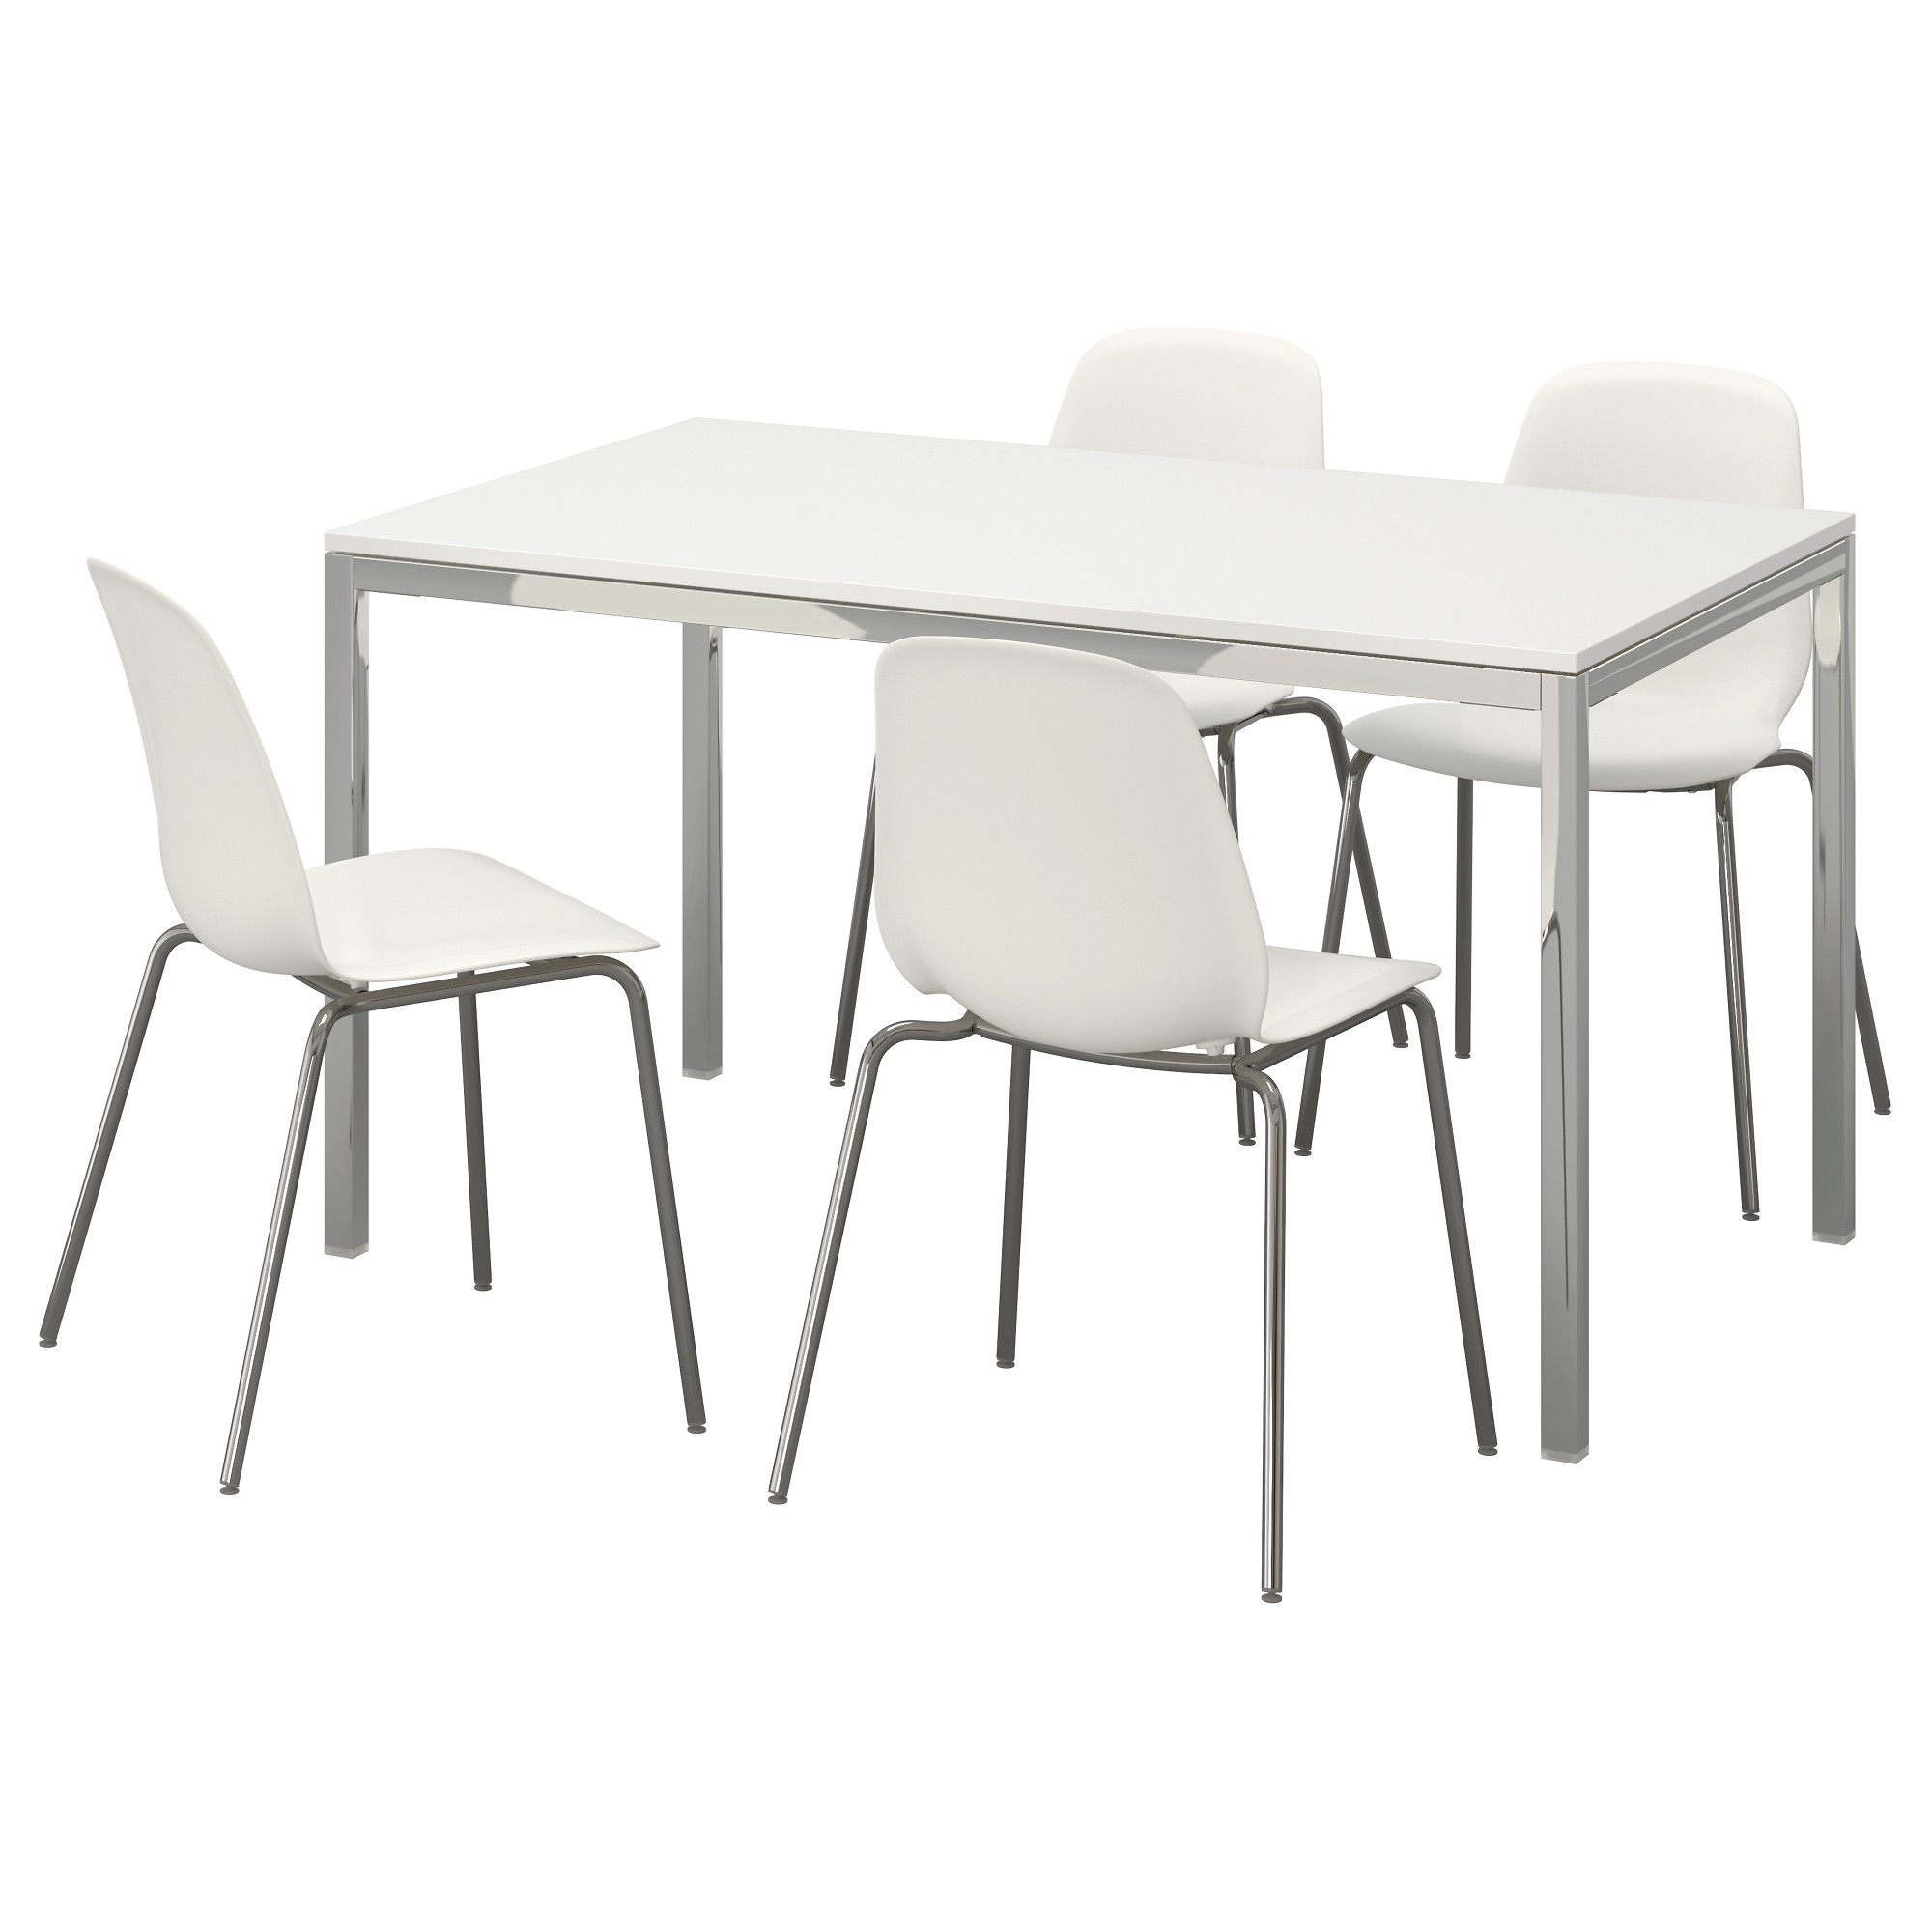 Torsby Leifarne Ikea Dining Sets, 4 Chair Dining Table Set Ikea